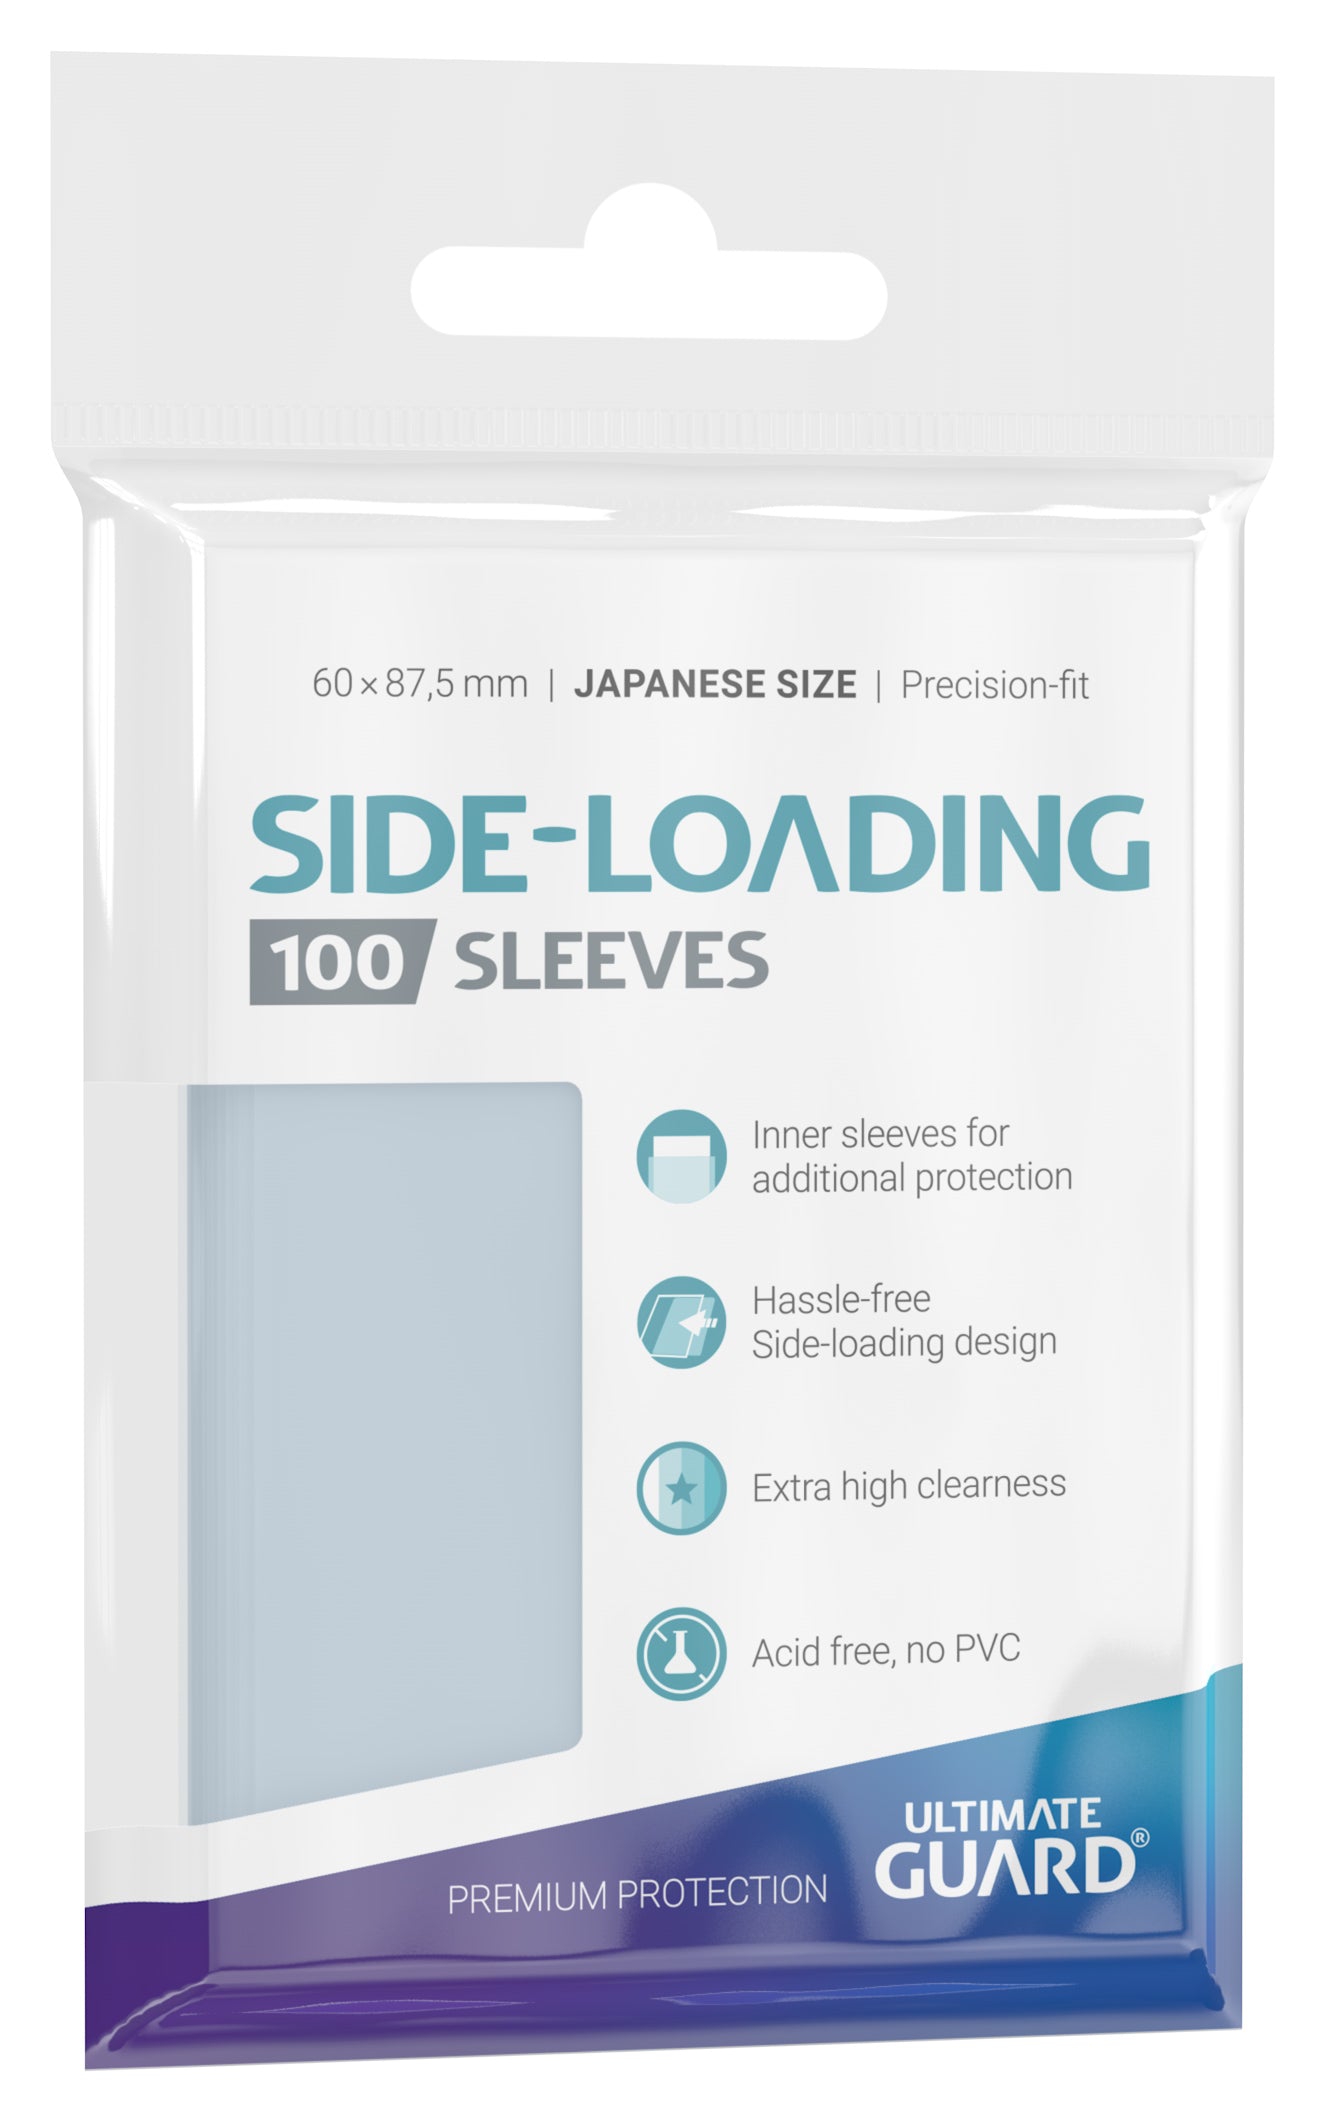 Ultimate Guard - Precise-Fit Sleeves Side-Loading Japanese Size Transparent (100)